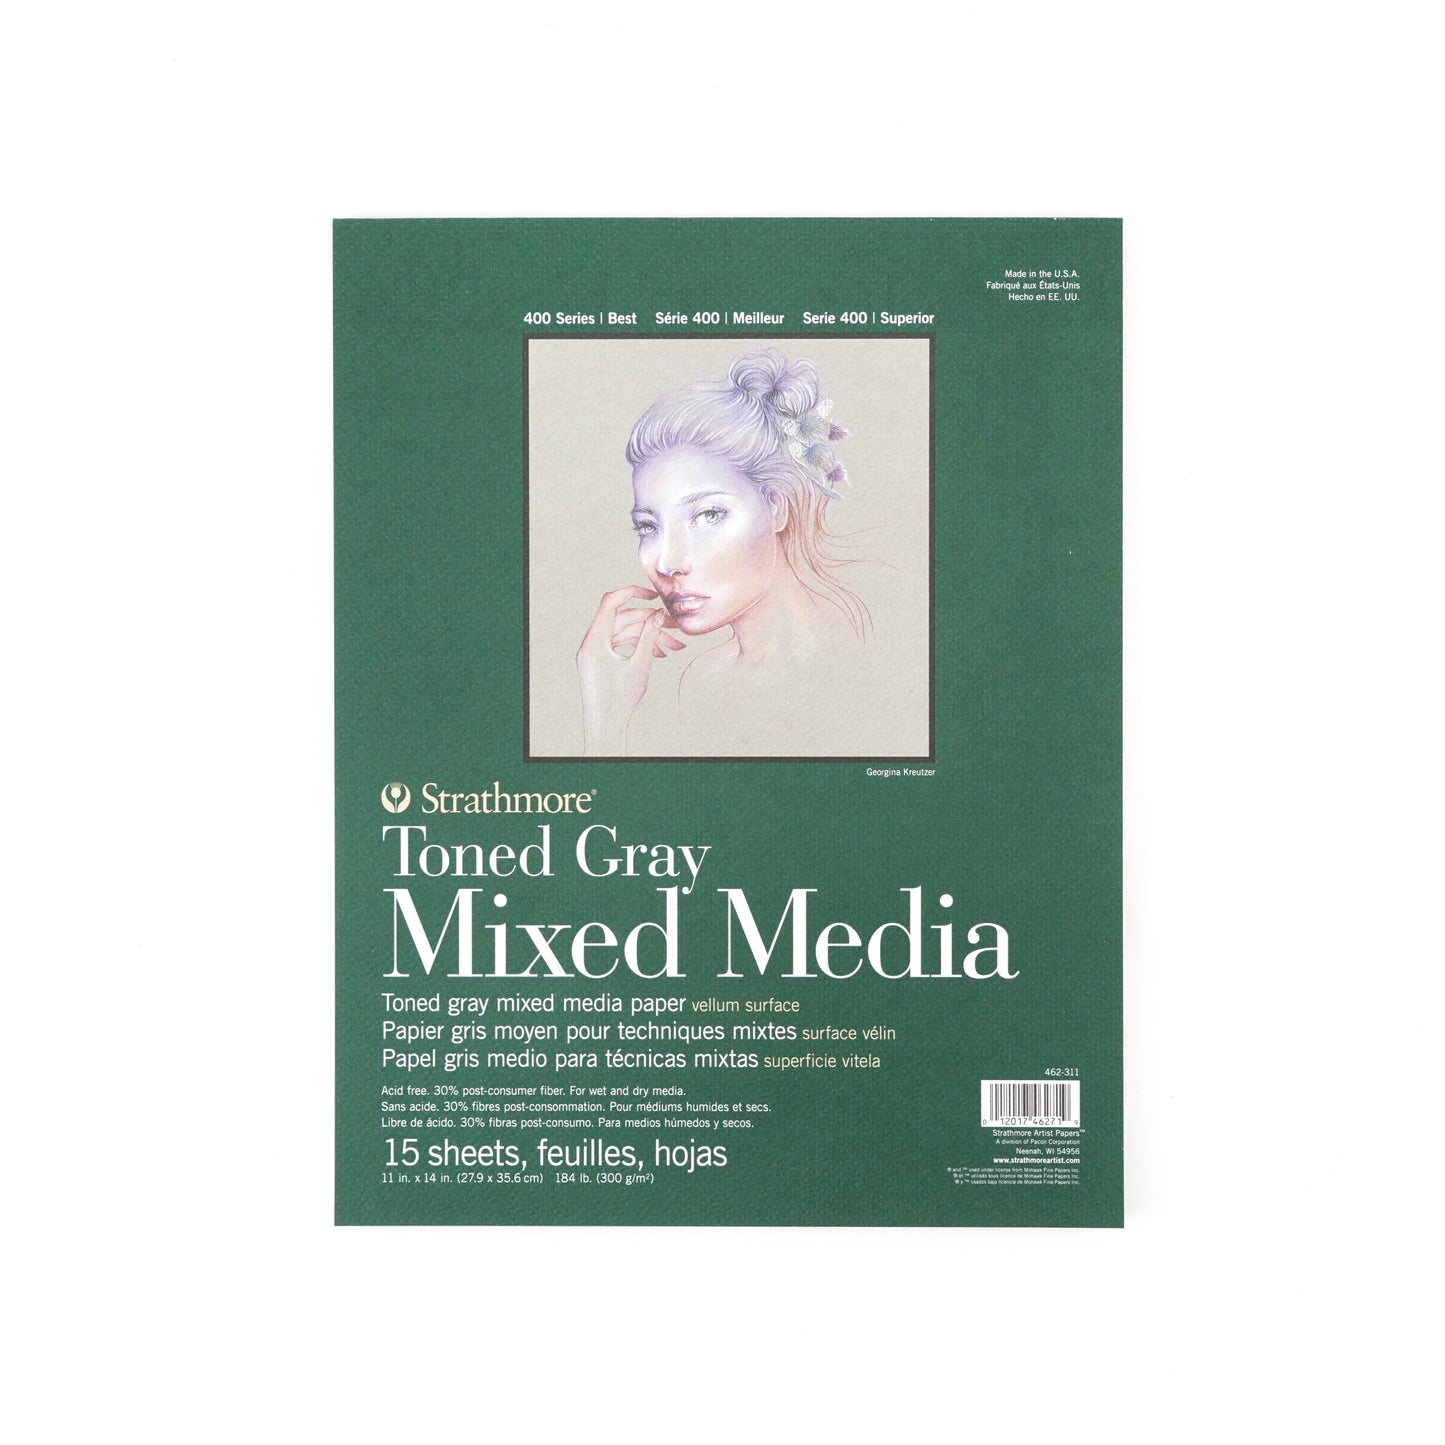 Strathmore Toned Gray Mixed Media Paper Pads – 400 Series - 11 x 14 inches by Strathmore - K. A. Artist Shop